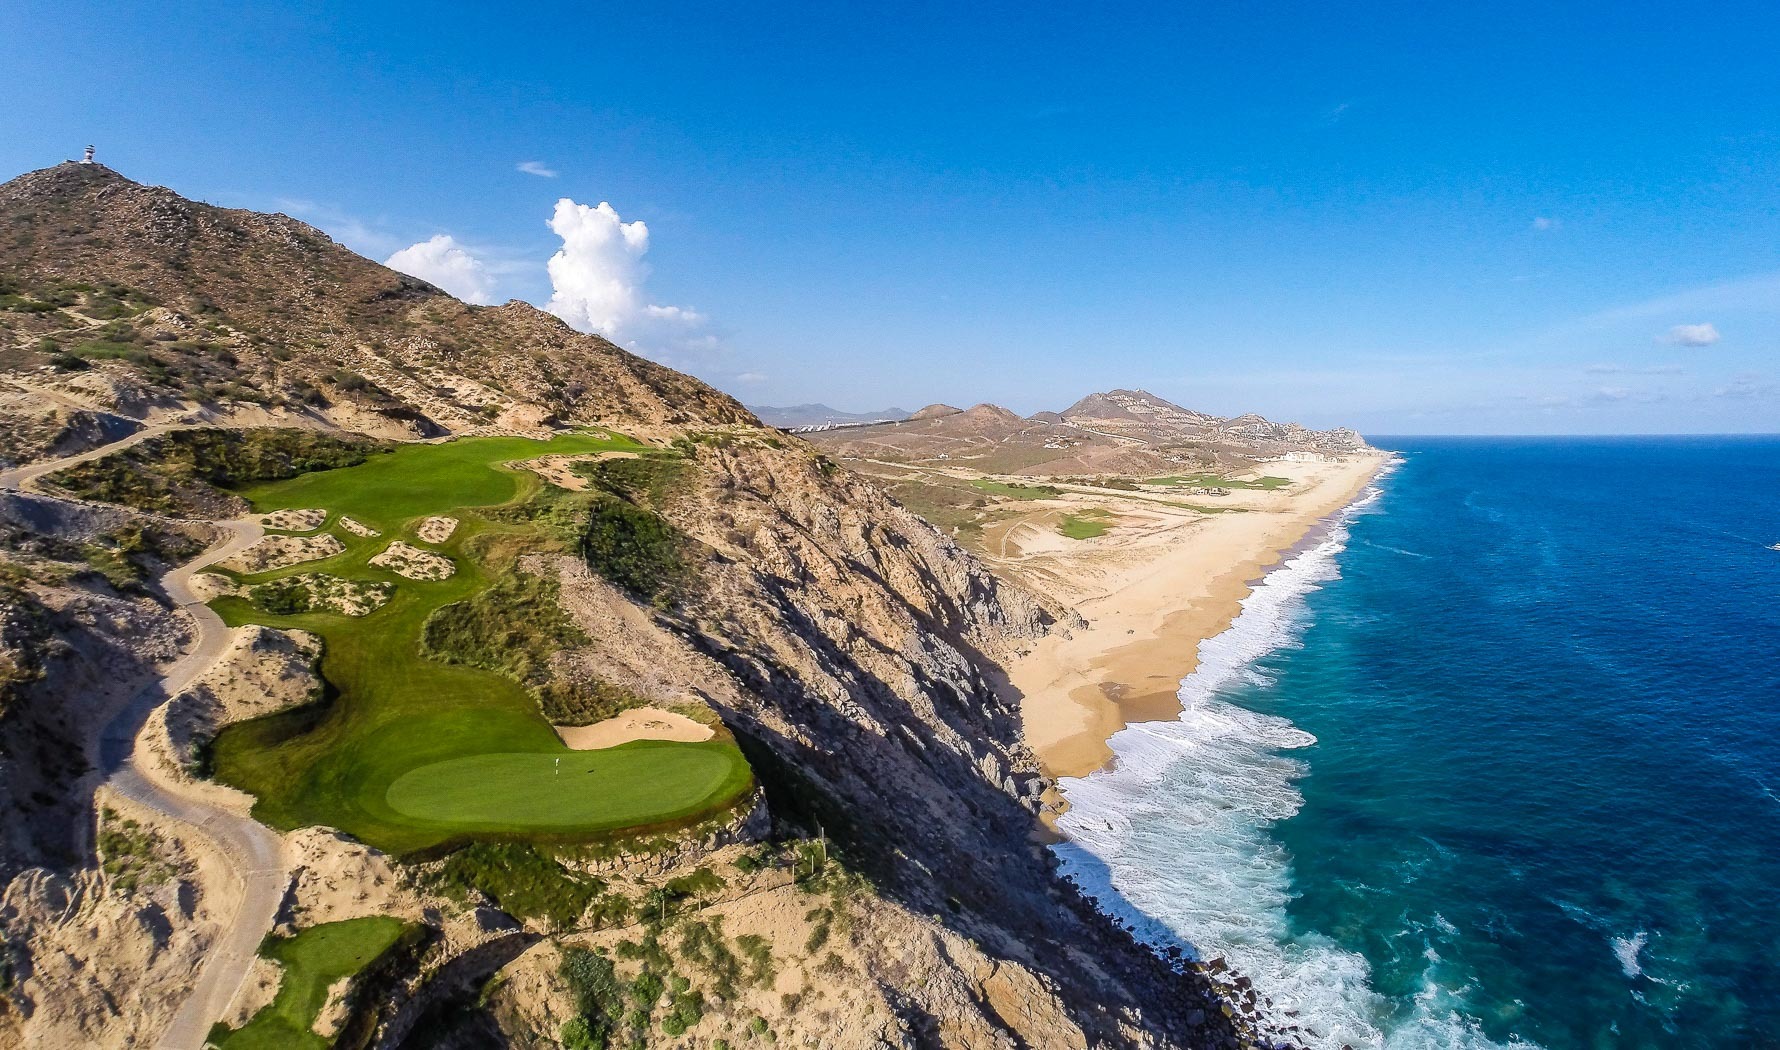 Golf Vacation Package - Best of the Best in Los Cabos!